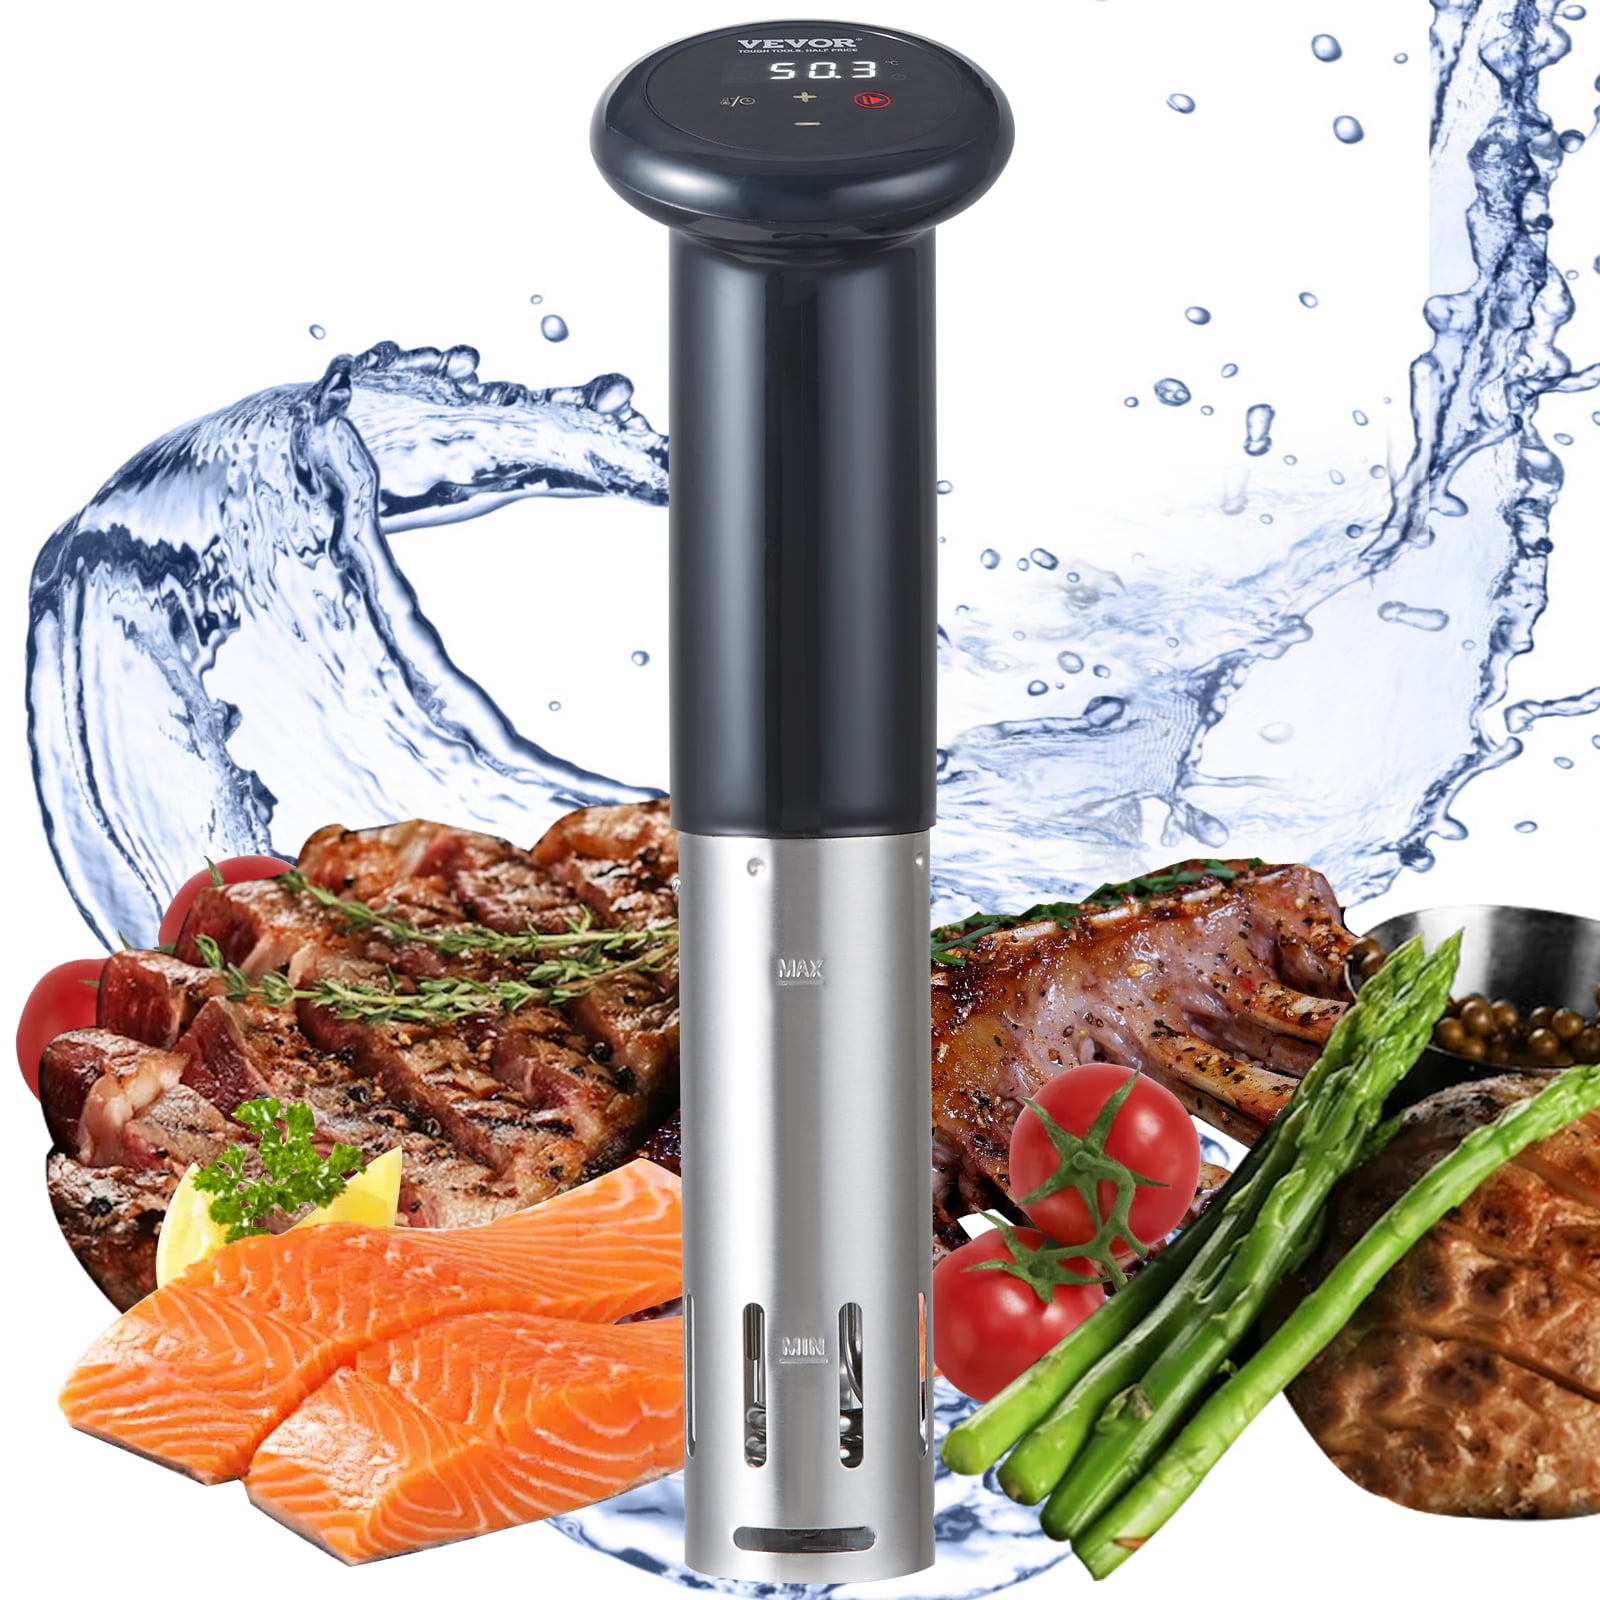  Mecity Sous Vide Precision Cooker Machine 1100W Water